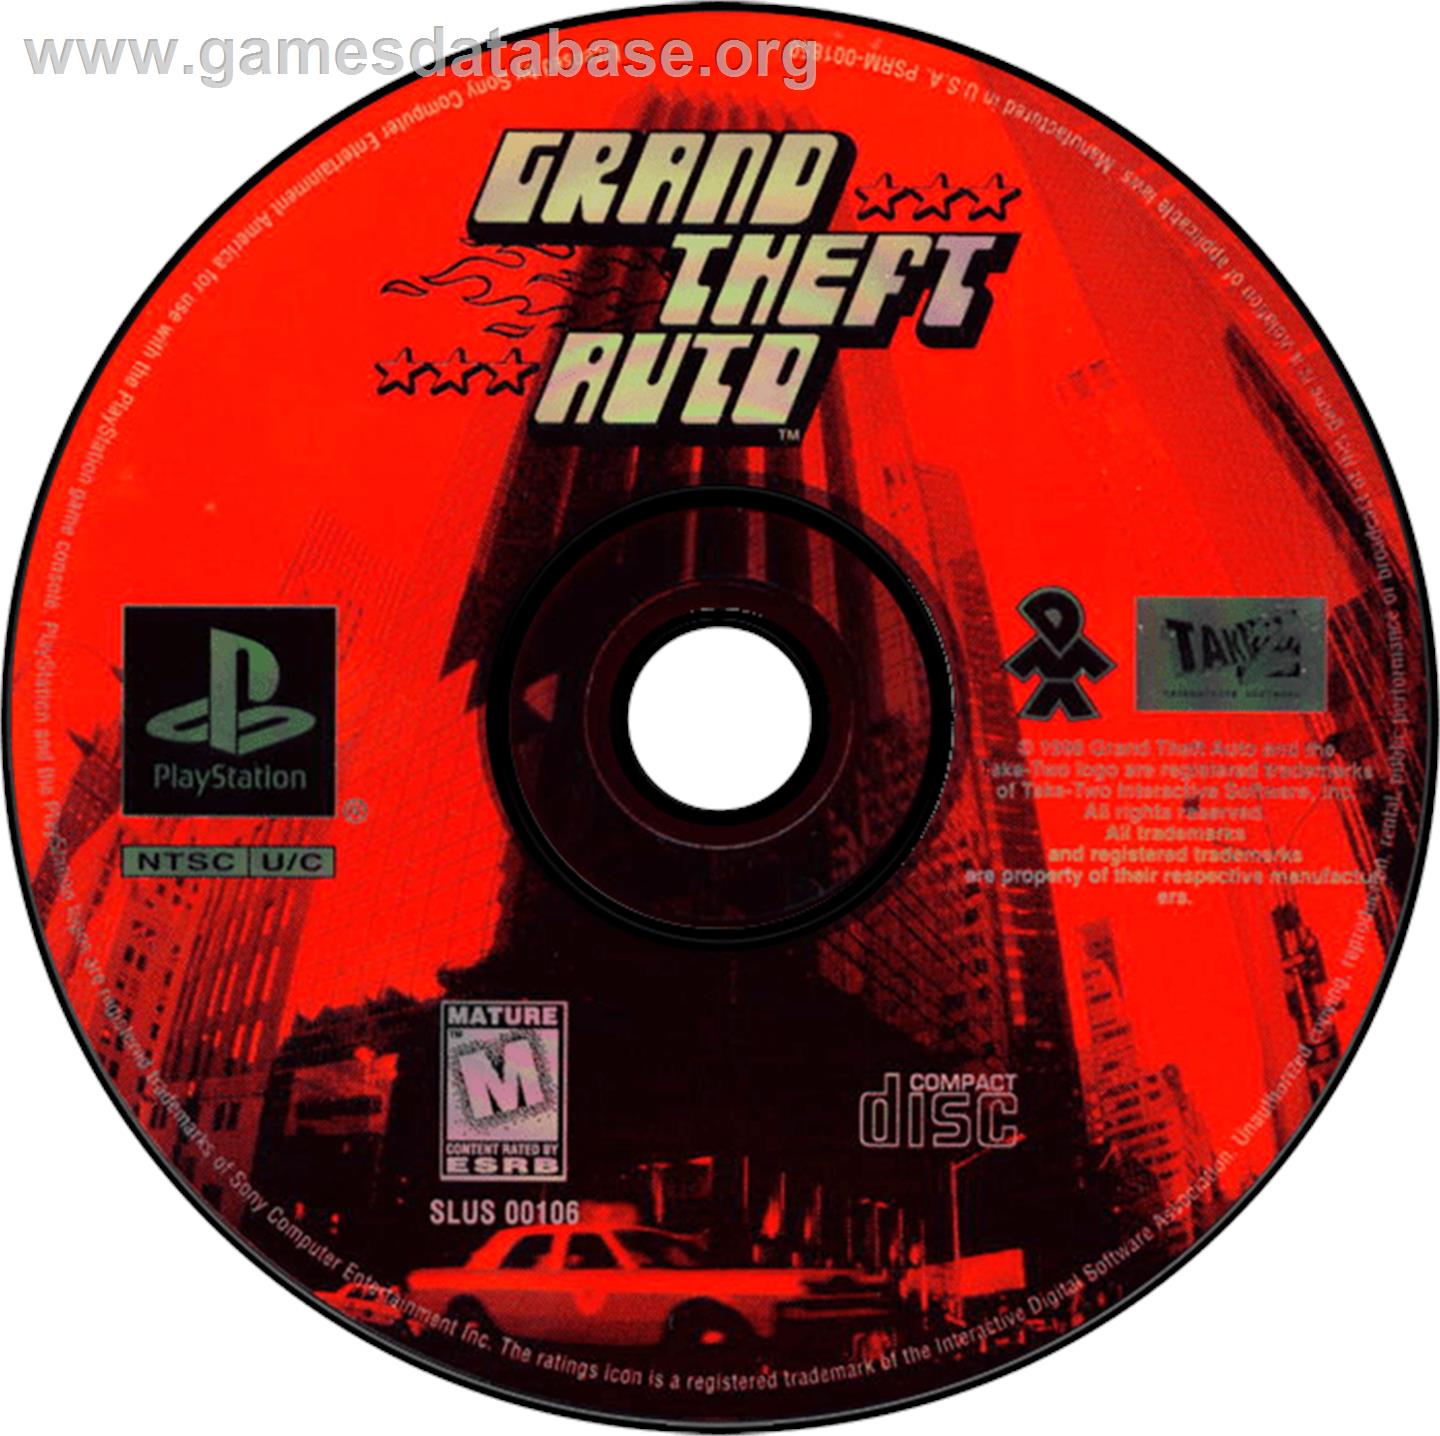 Grand Theft Auto: Director's Cut - Sony Playstation - Artwork - Disc